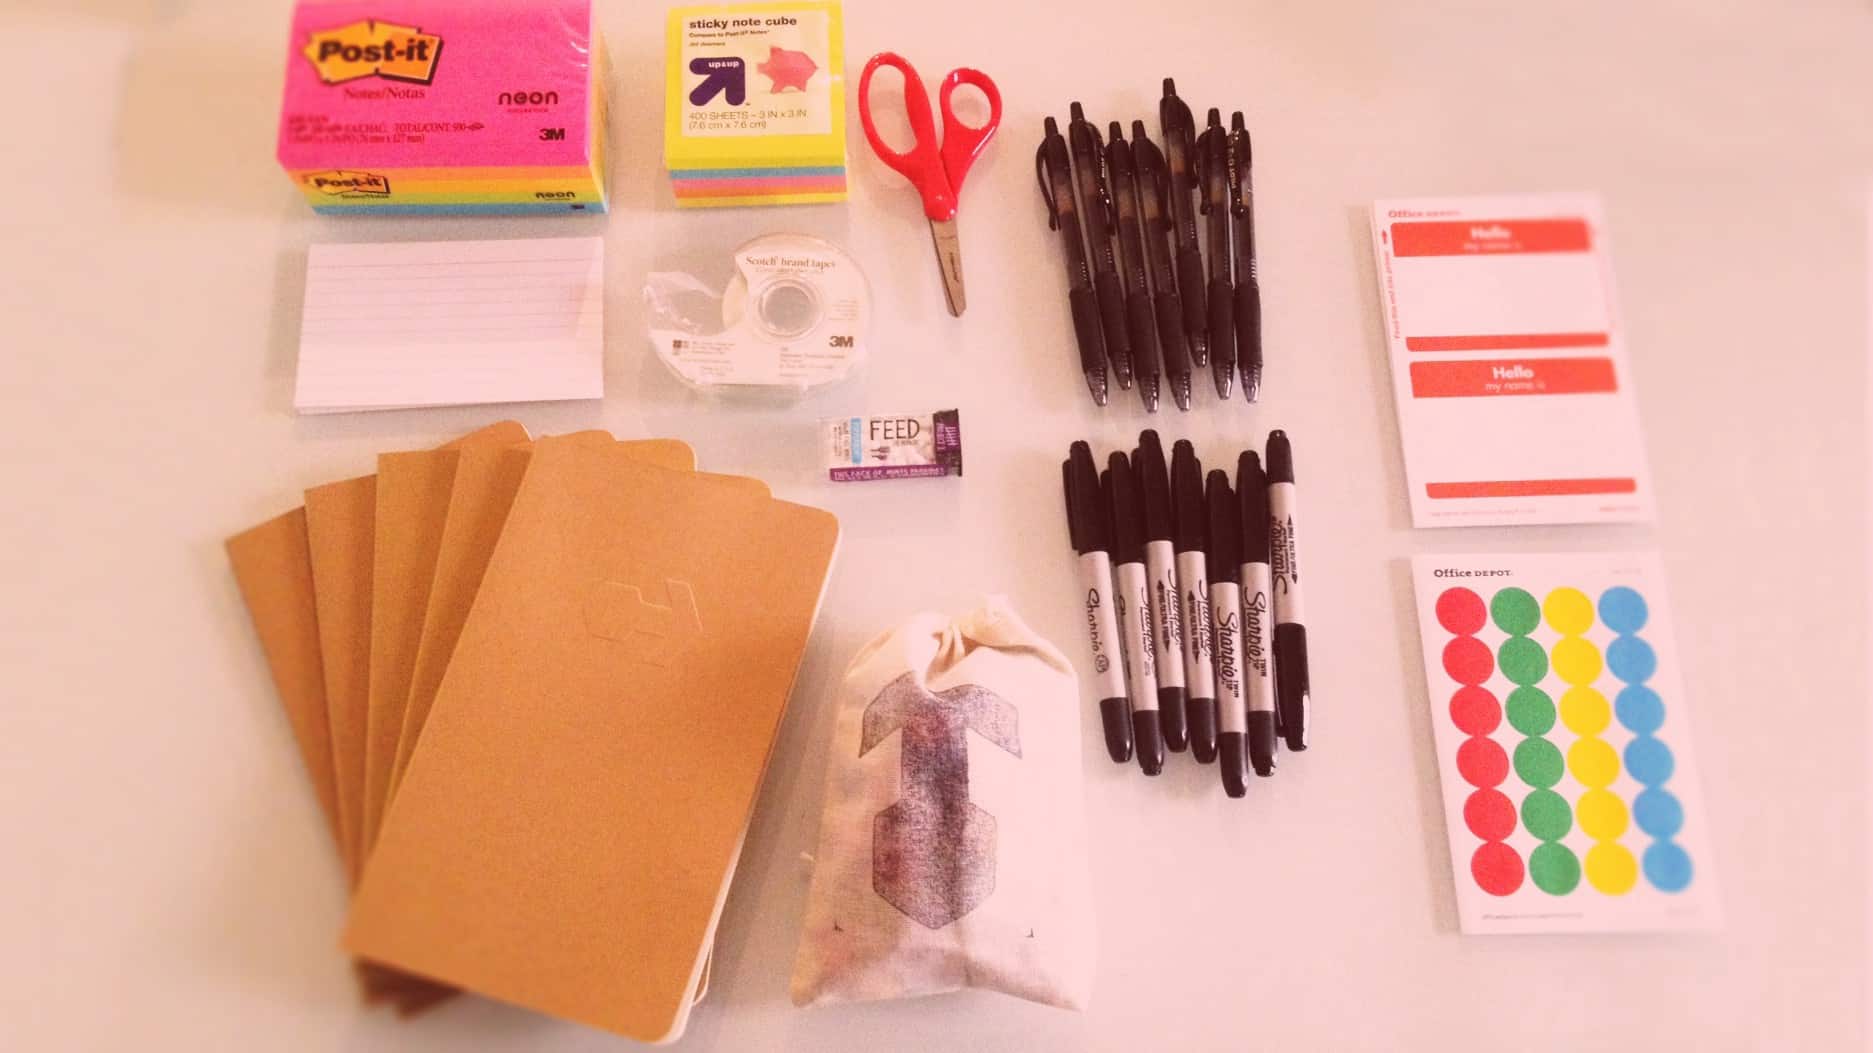 An assortment of supplies used in a CauseLabs strategy workshop